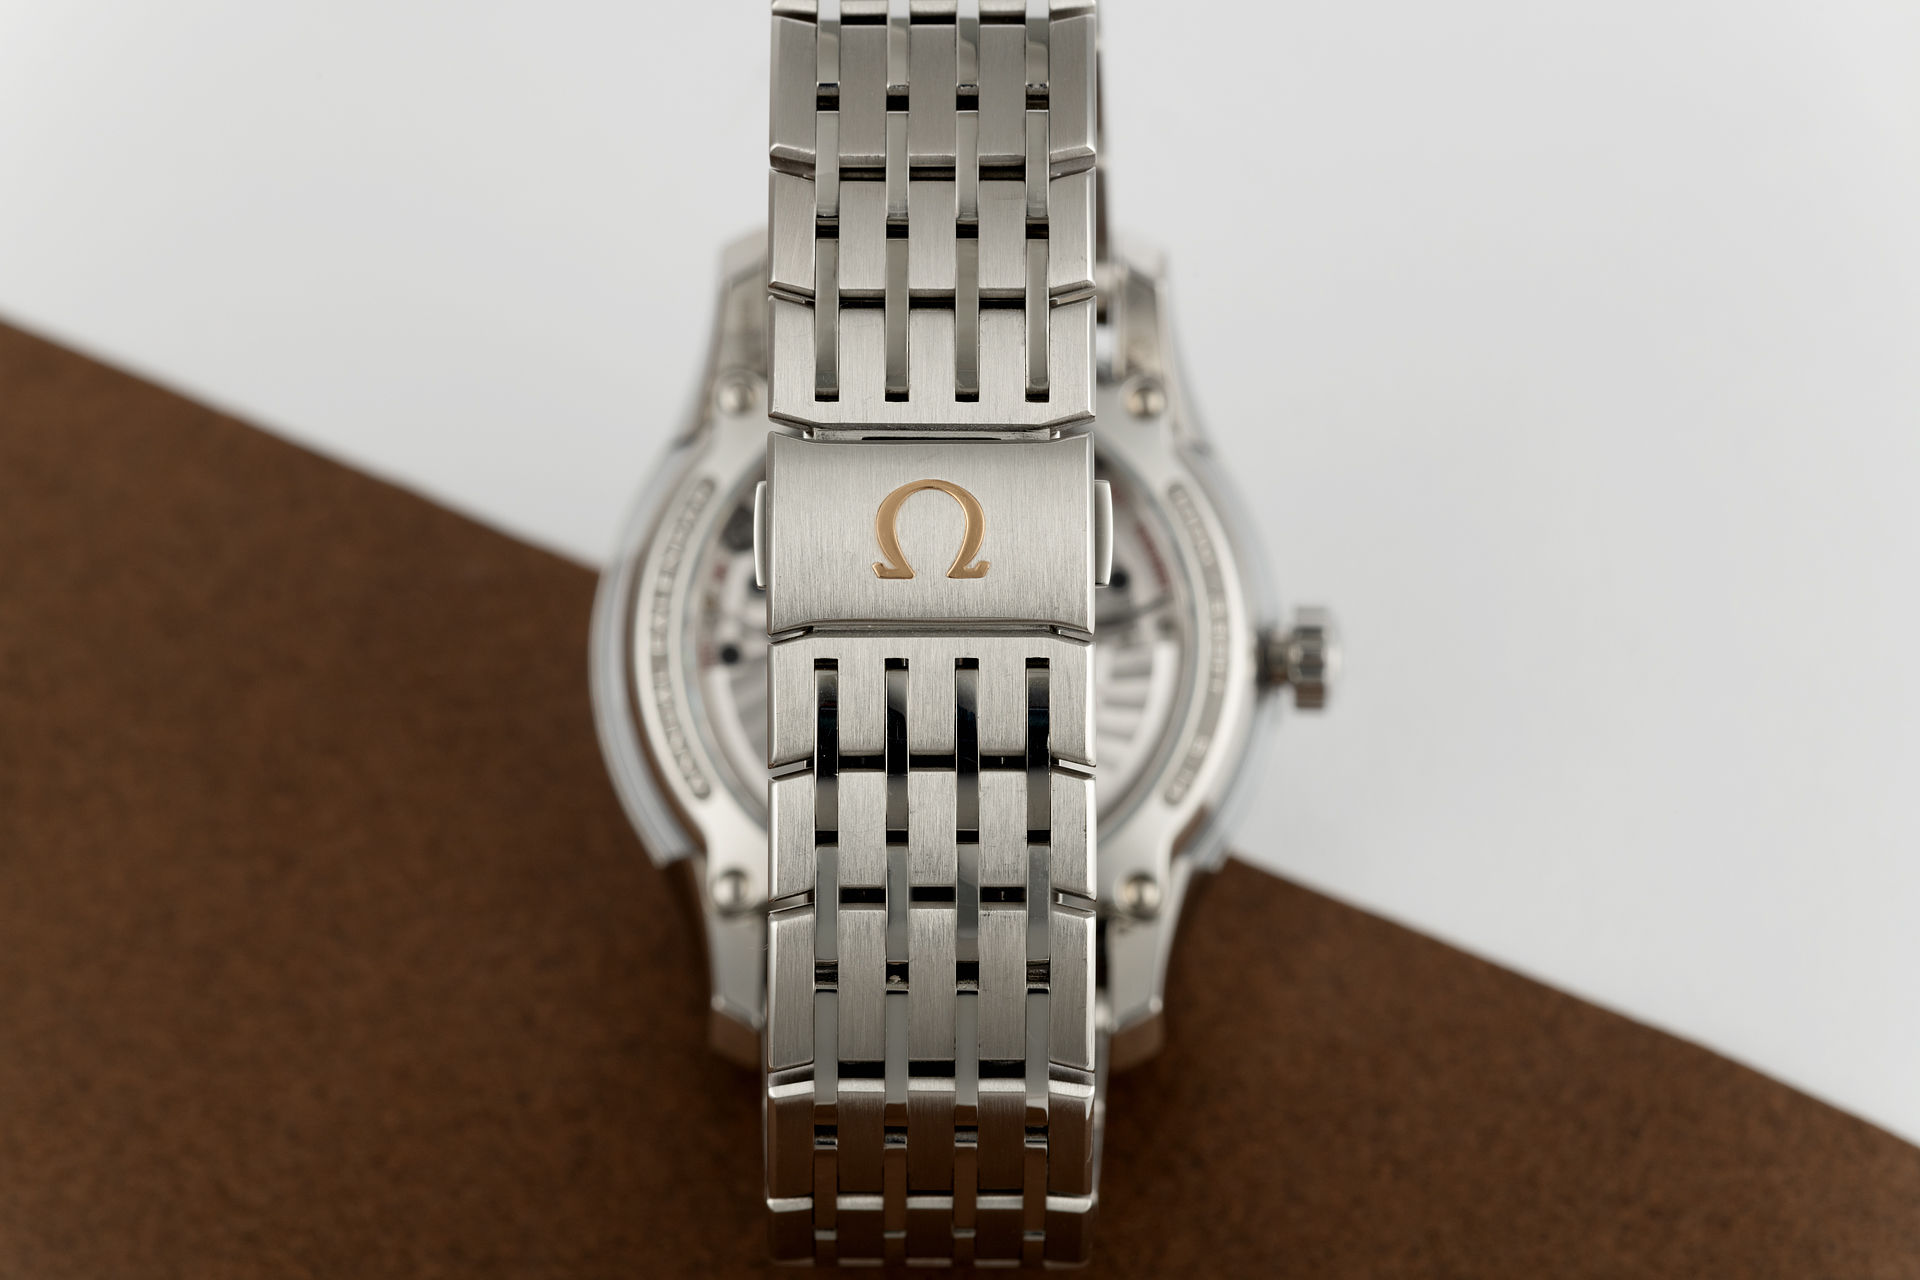 ref 431.30.41.22.02.001 | 'Sapphire Case' Stainless Steel | Omega Hour Vision